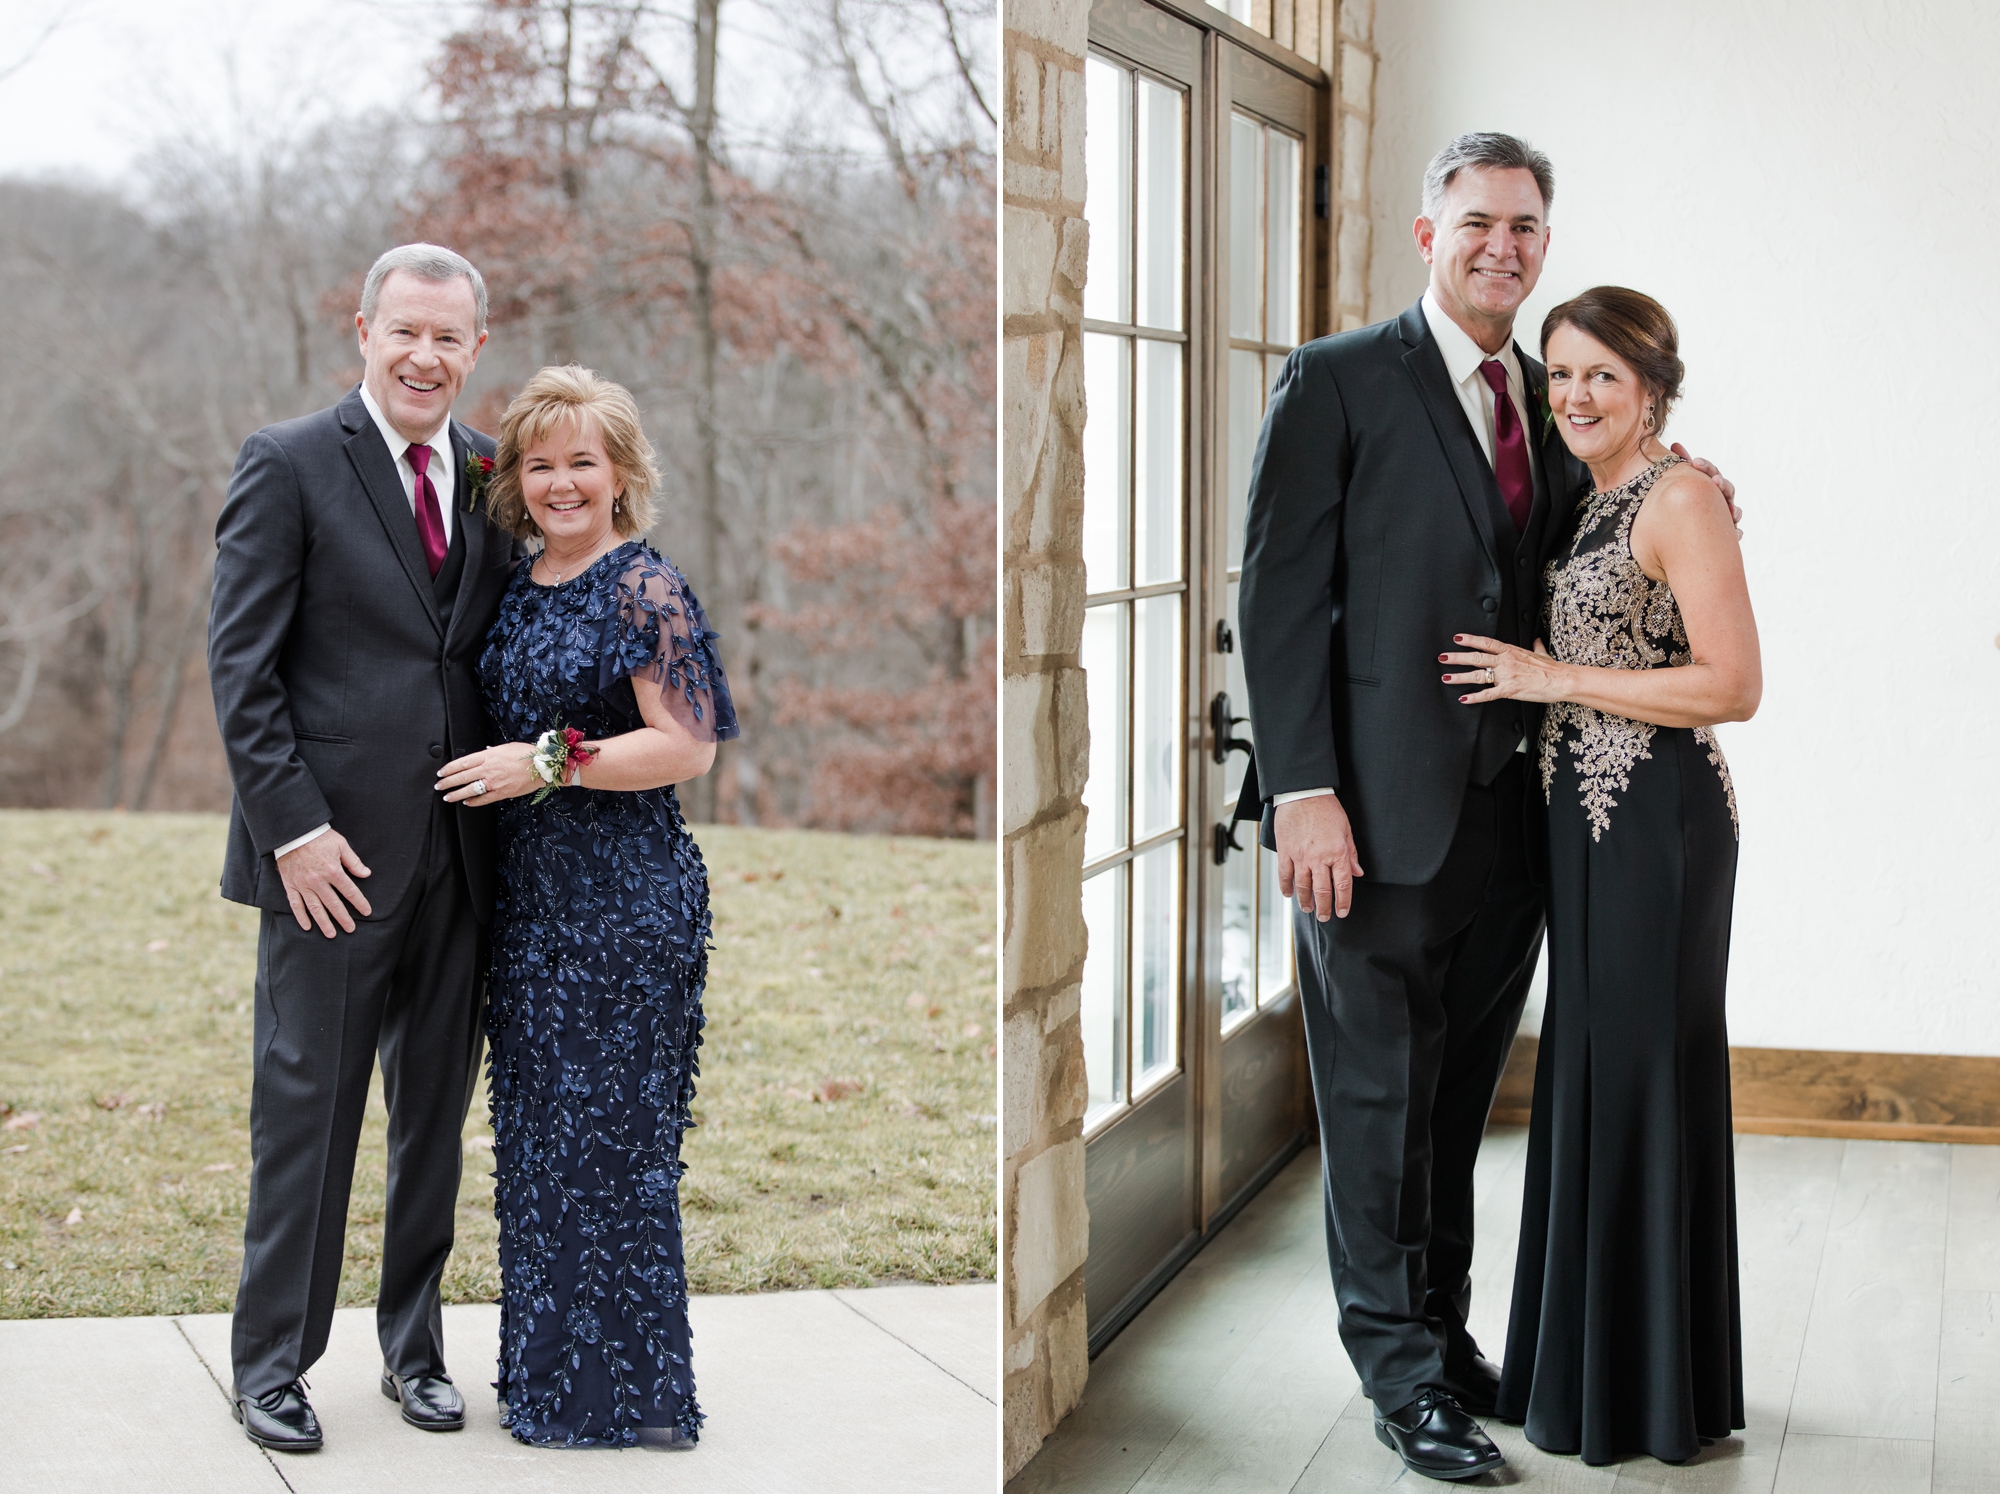 Silver Oaks Chateau Parents of Bride and Groom Winter Wedding Photogenics on Location